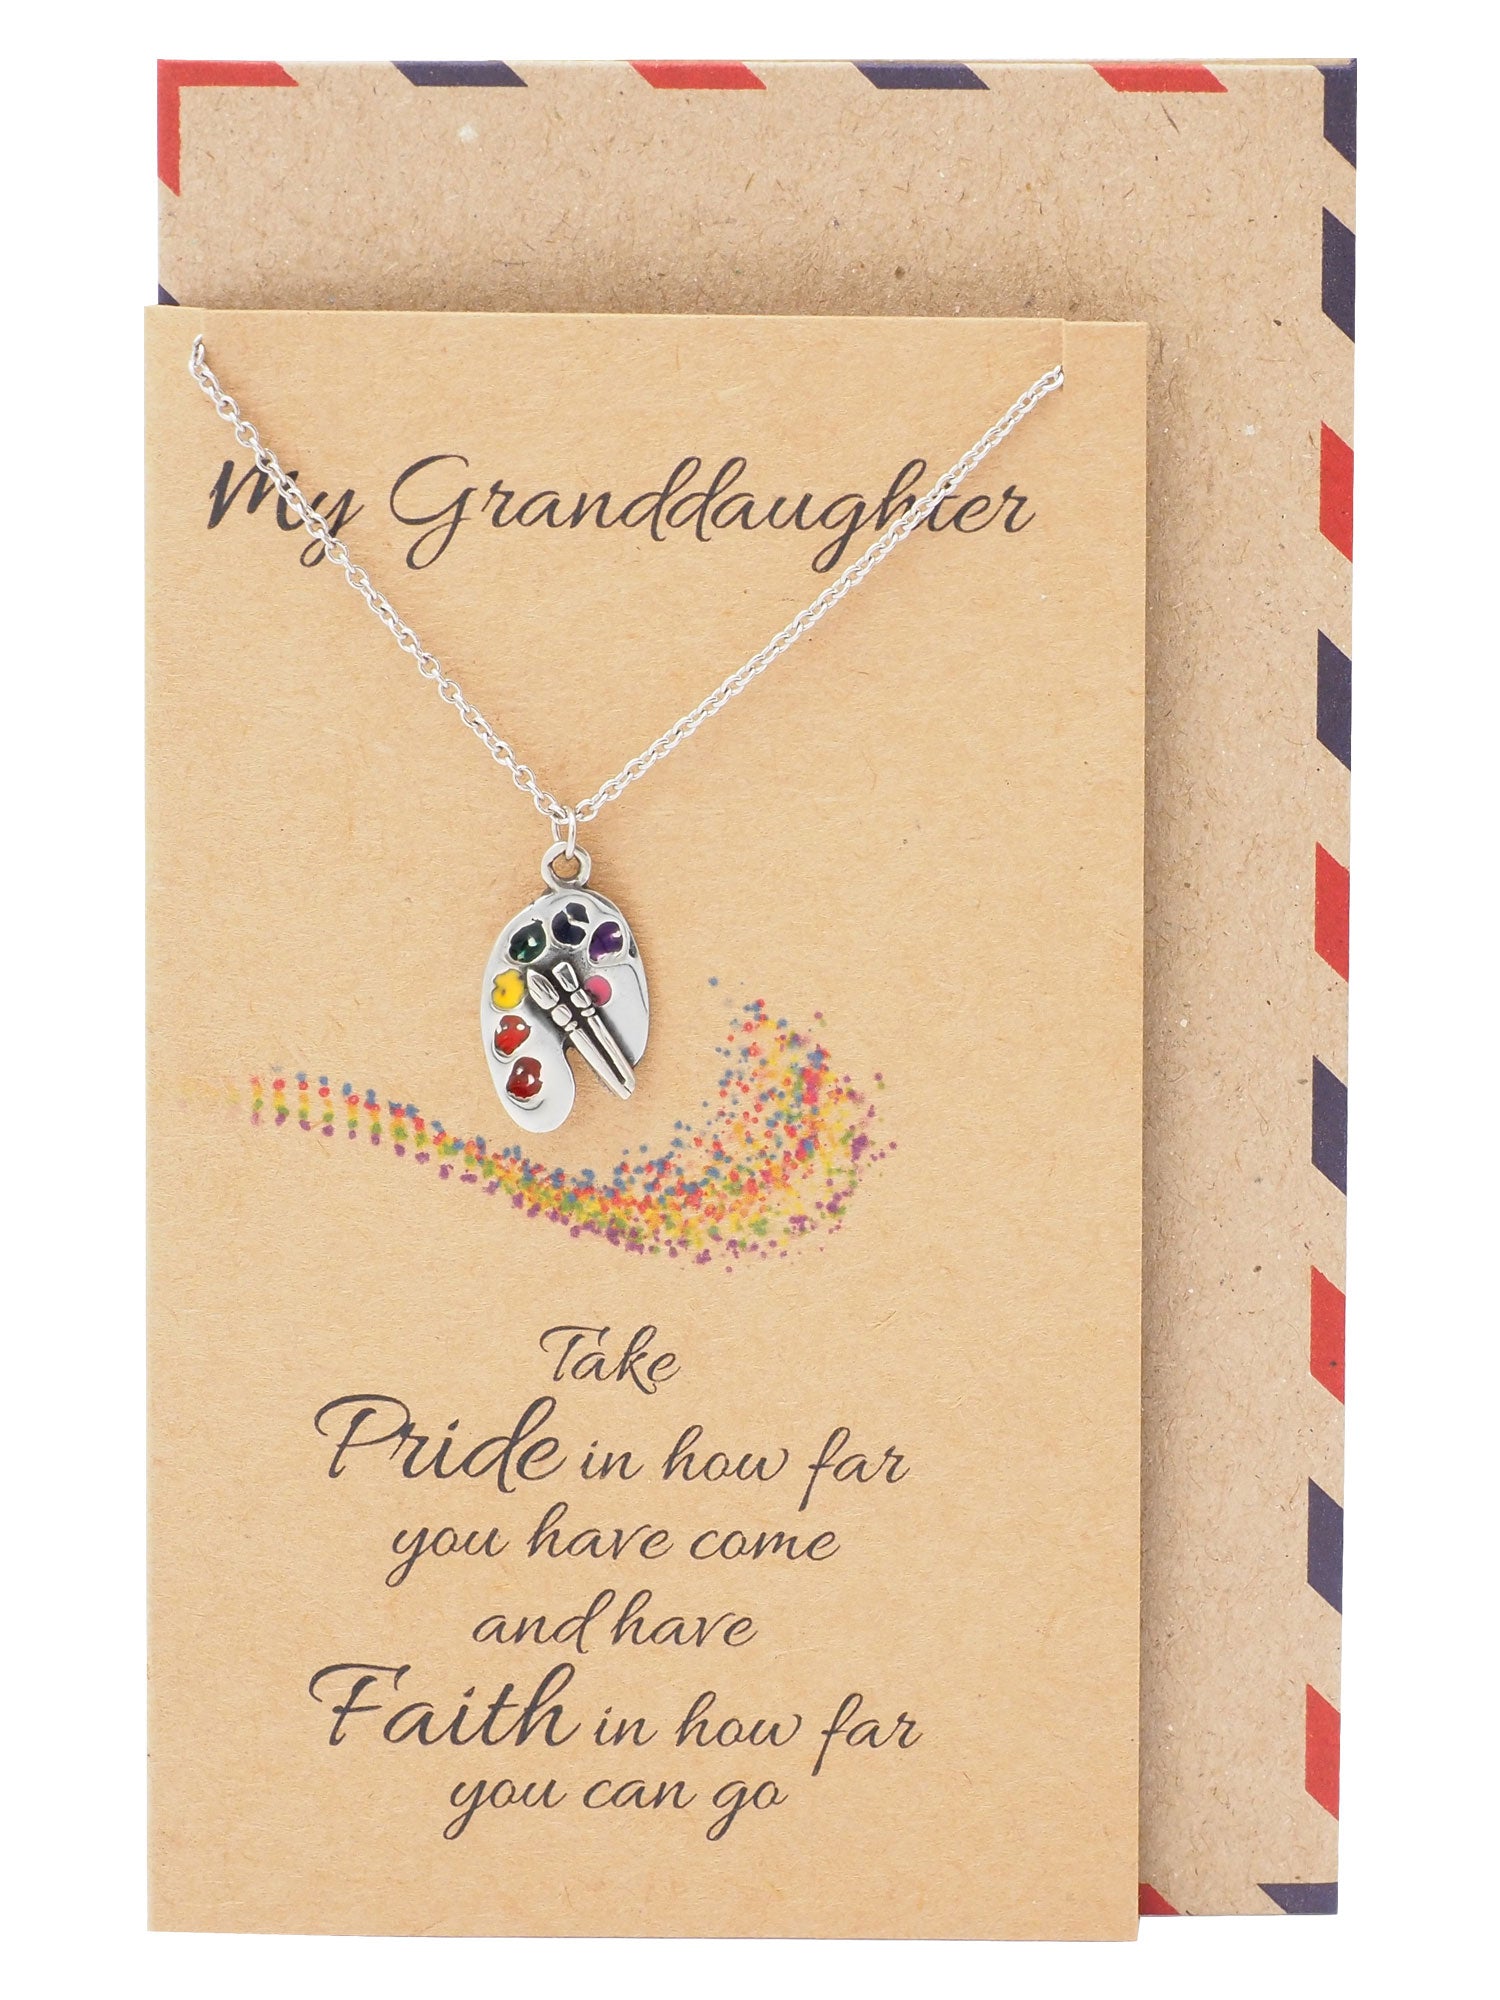 Sammy Happy Birthday Granddaughter Paint Necklace with Inspirational Quote